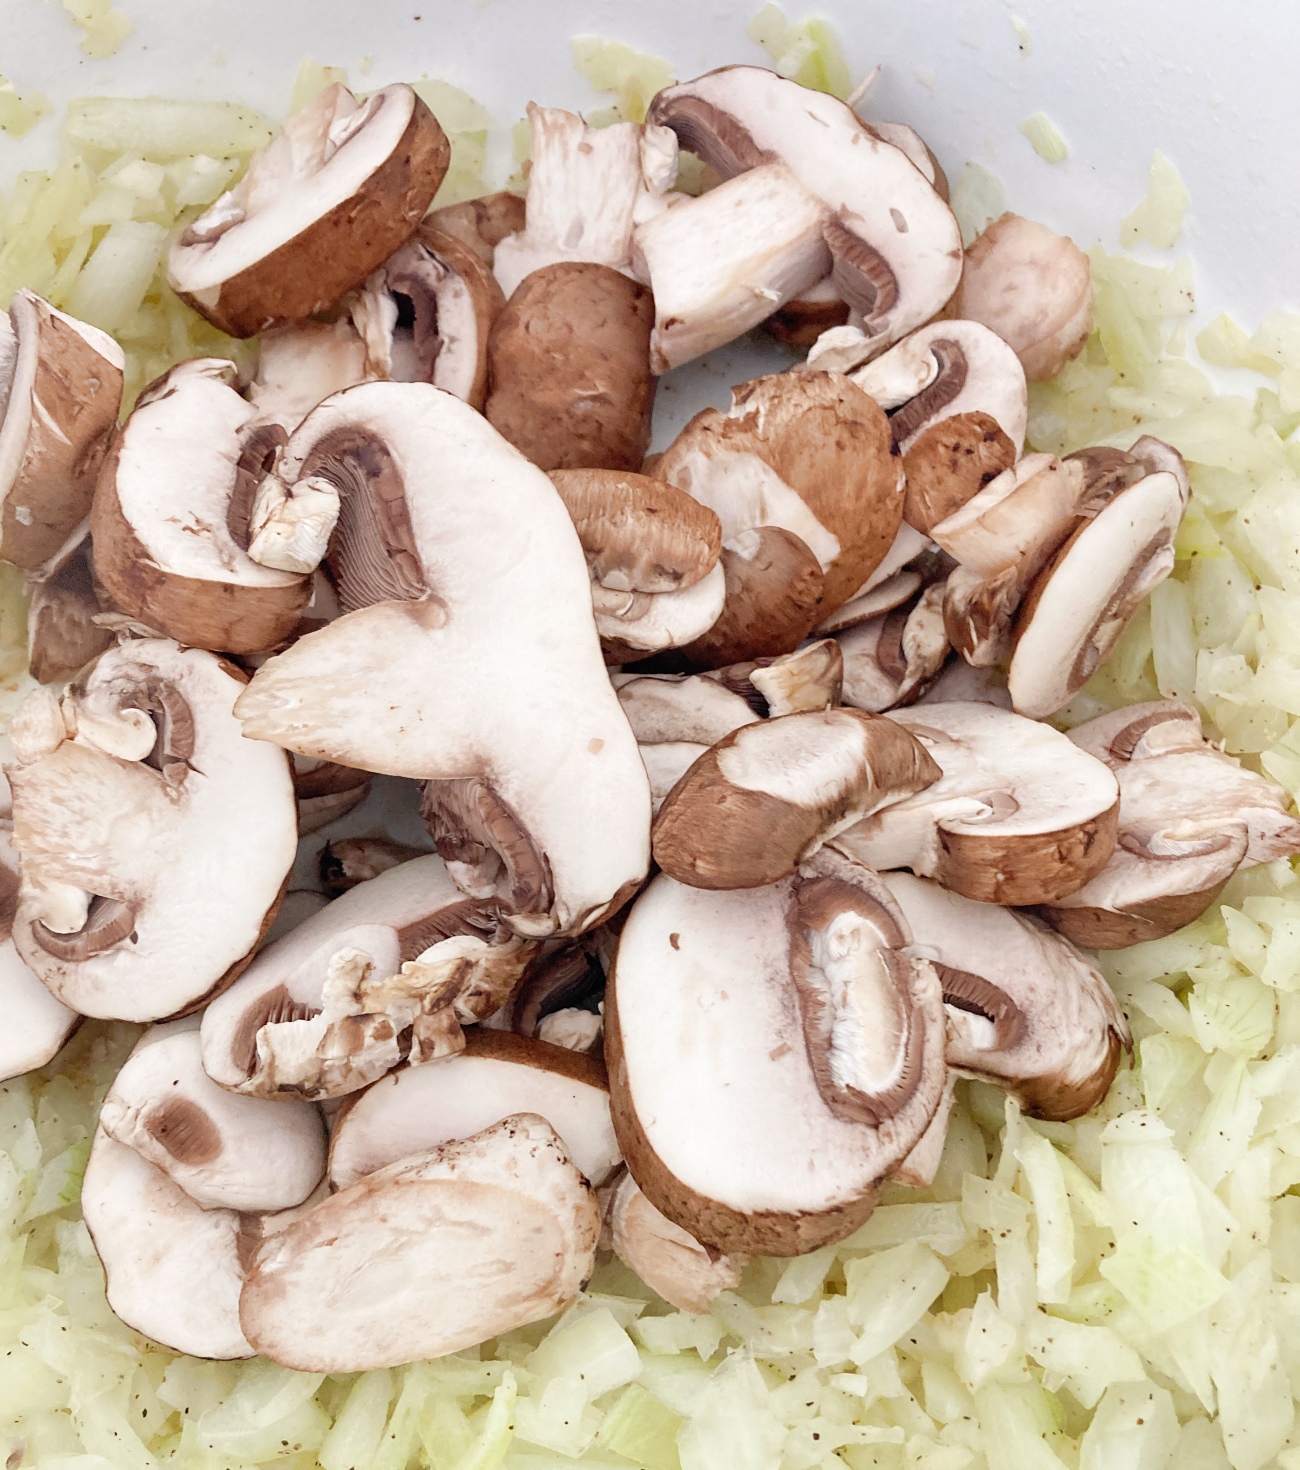 Add 2 tablespoons oil to a medium stockpot set to medium heat. Add chopped onions and garlic. Cook for 8 minutes. Make a hot spot in the center and add 1 tablespoon oil and fresh mushrooms. Cook for 10 minutes, stirring mushrooms twice until they are browned on both sides.